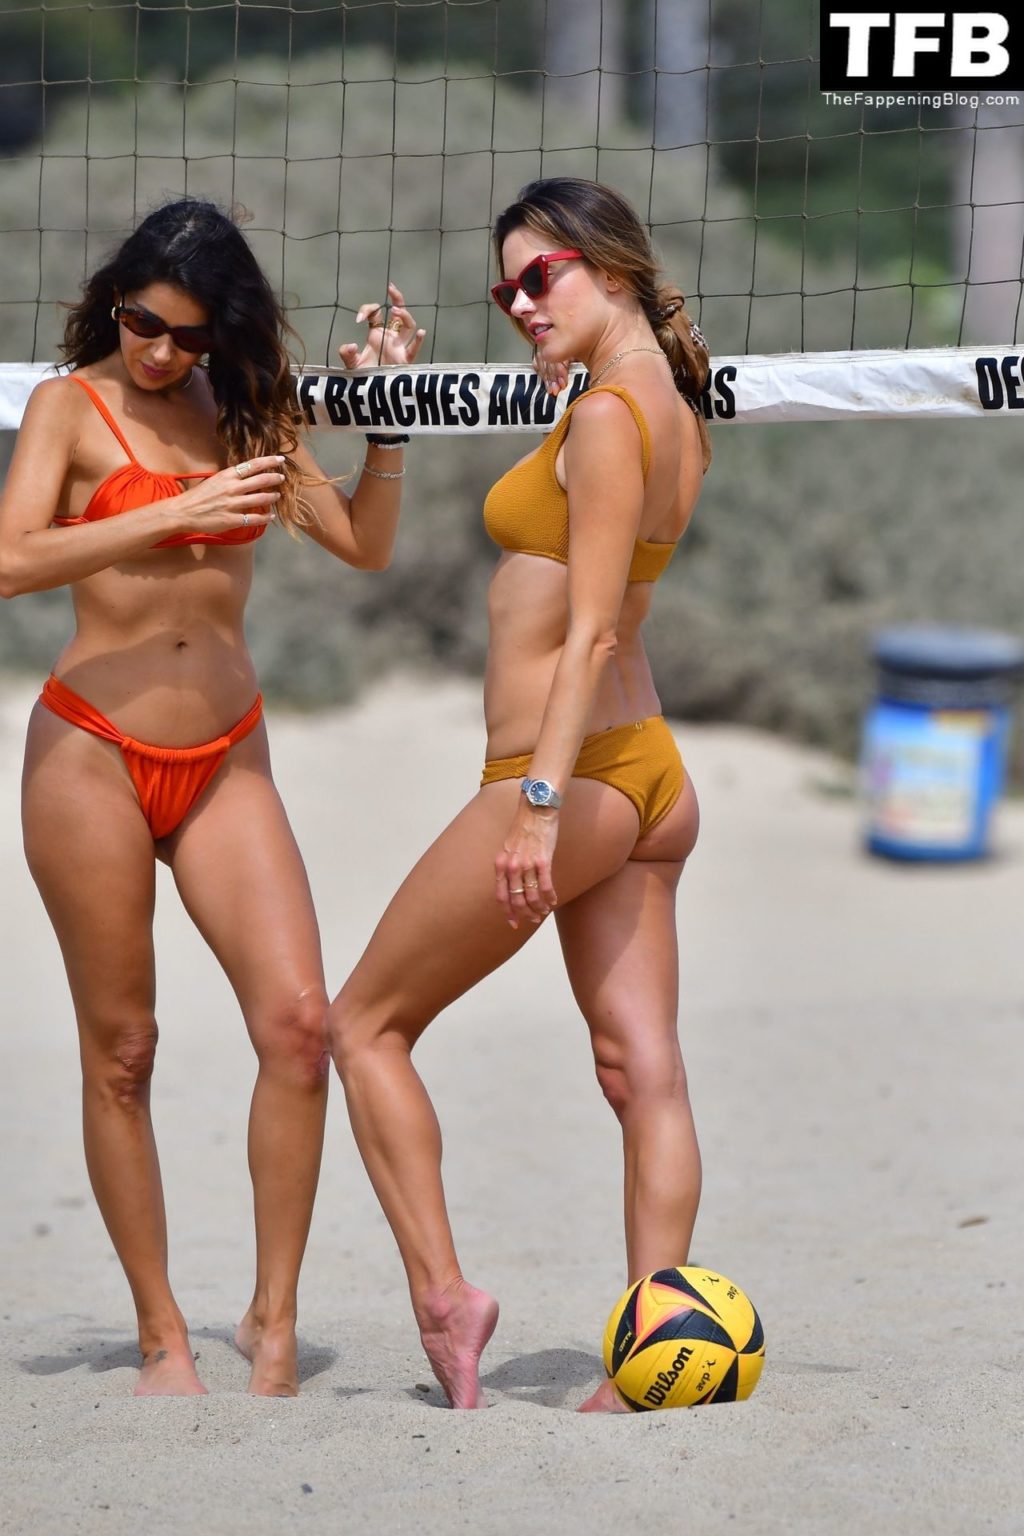 Alessandra Ambrosio Poses for Pictures with a Friend During a Game of Beach Volleyball (150 Photos)